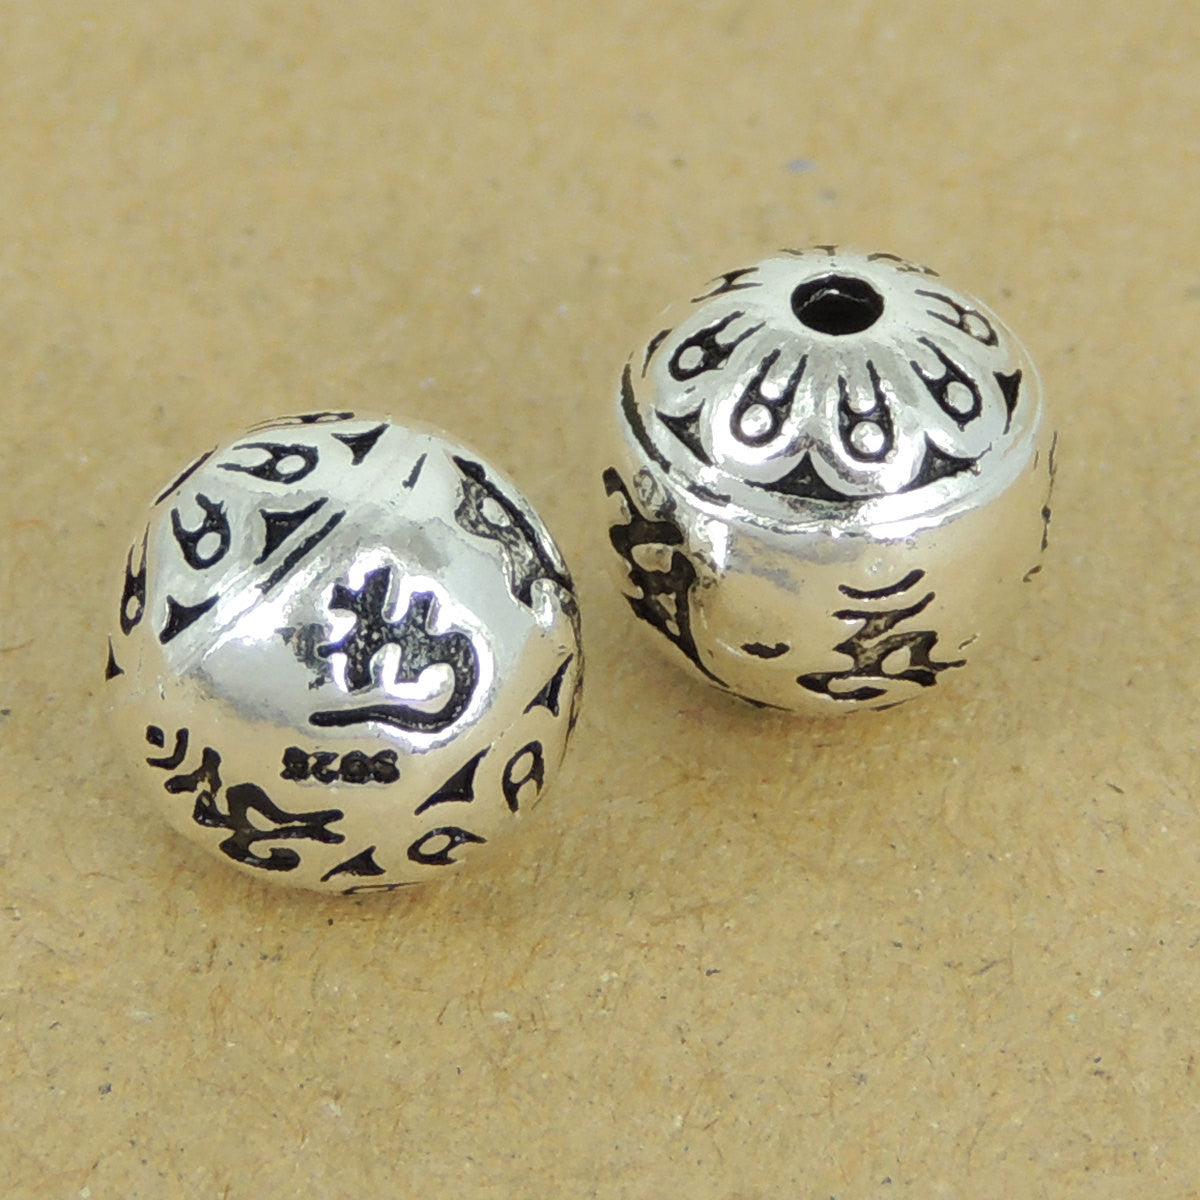 2 PCS Round OM Meditation Beads - S925 Sterling Silver WSP407X2